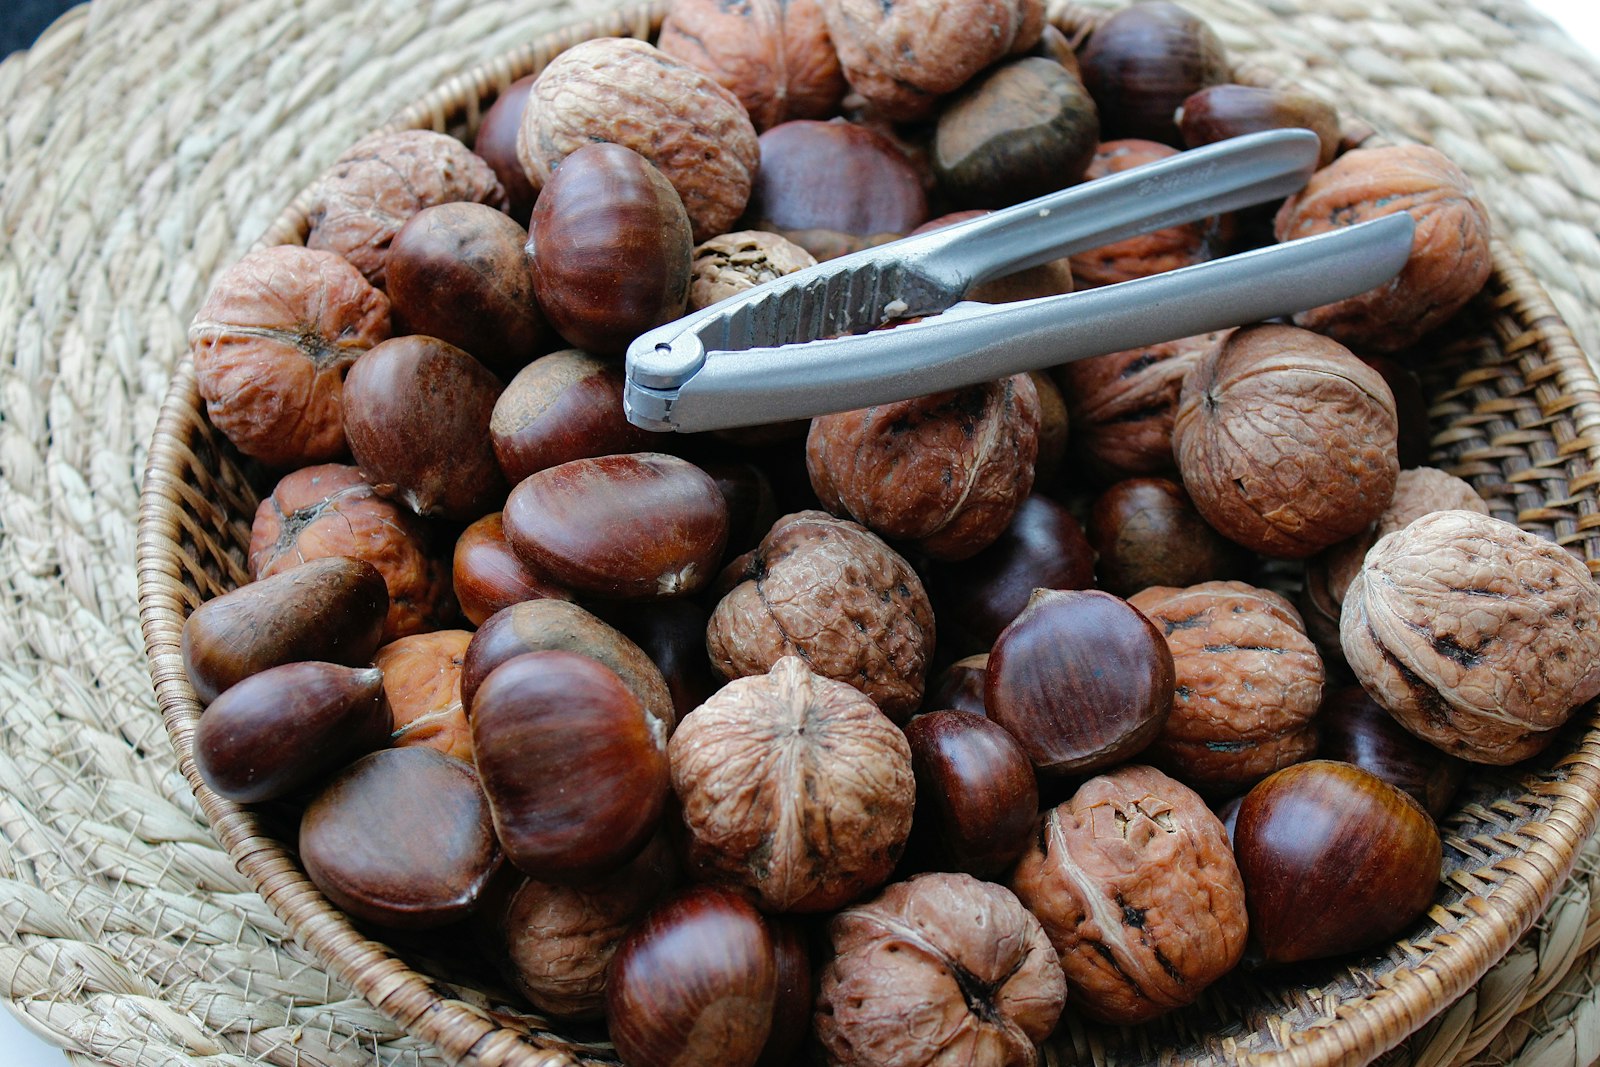 The ancient art of drying chestnuts - we find out what the Metato is for....